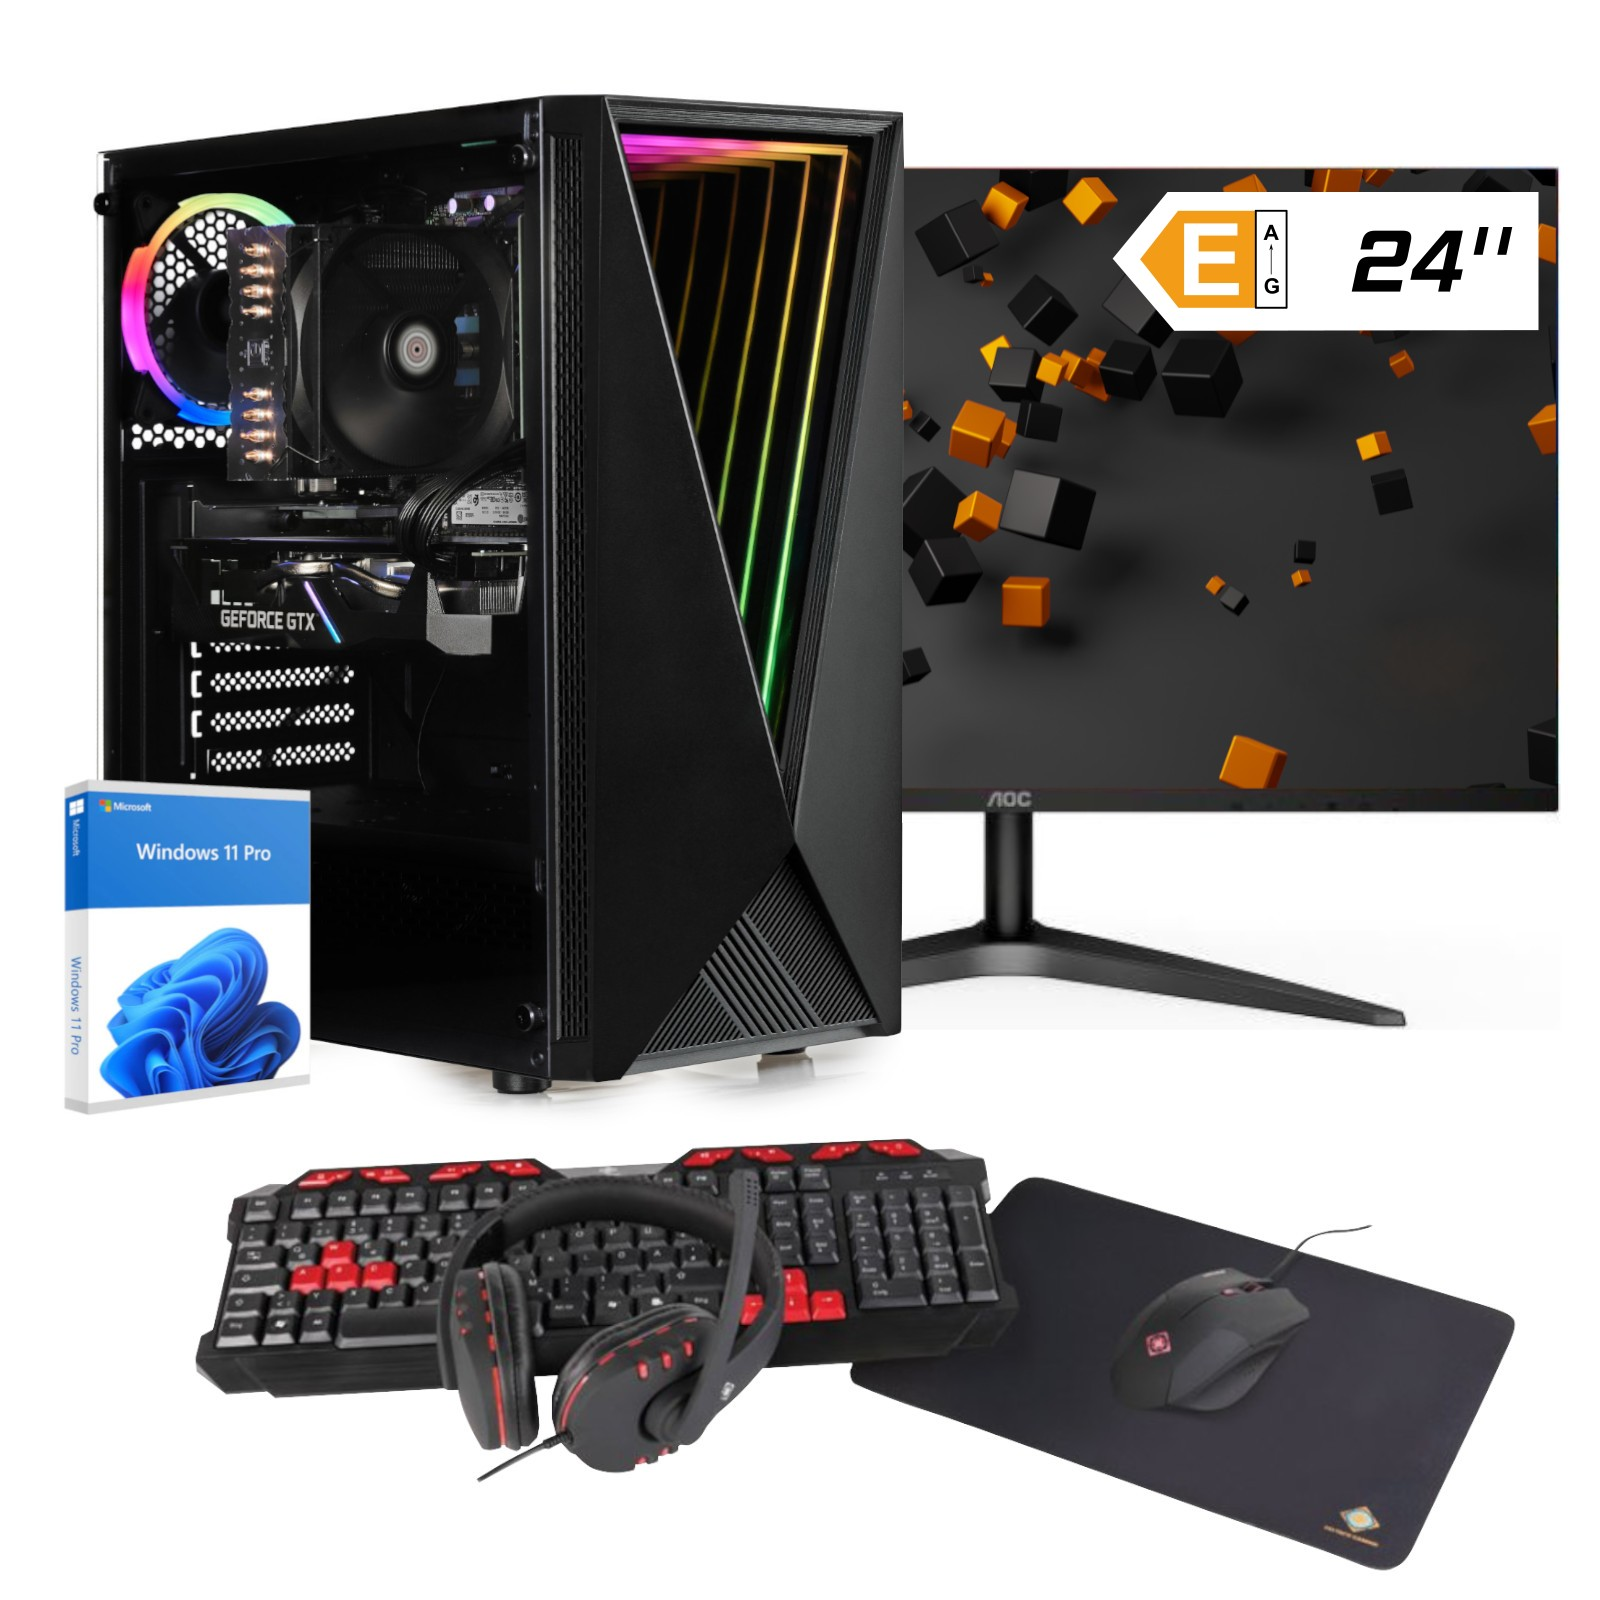 GB 1000 GB DCL24 SSD Void, Gaming PC, 16 RAM,